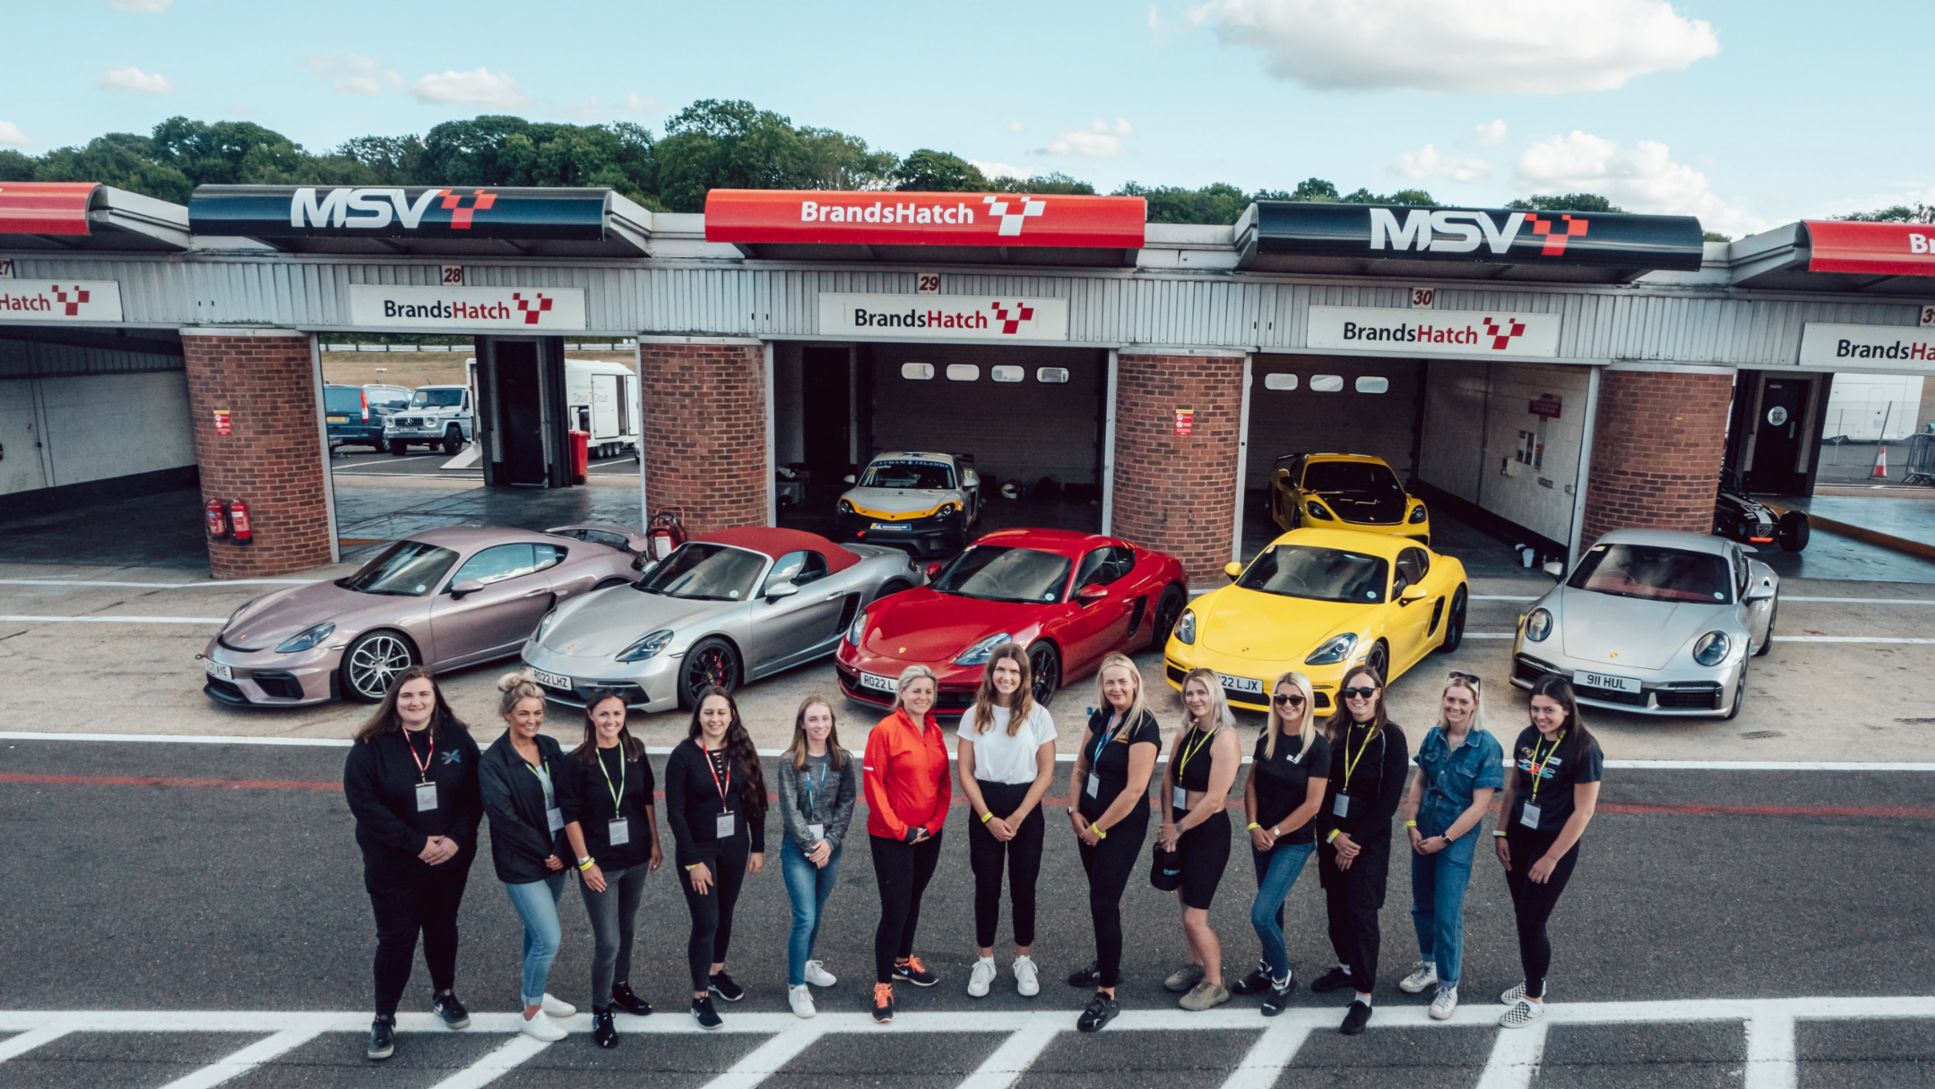 Esmee Hawkey, 718 Cayman GT4, 718 Cayman GTS 4.0, 718 Boxster GTS 4.0, 718 Cayman, 911 Turbo S, "We Drive with Esmee Hawkey" Event, Brands Hatch, Great Britain, 2022, Porsche Cars Great Britain